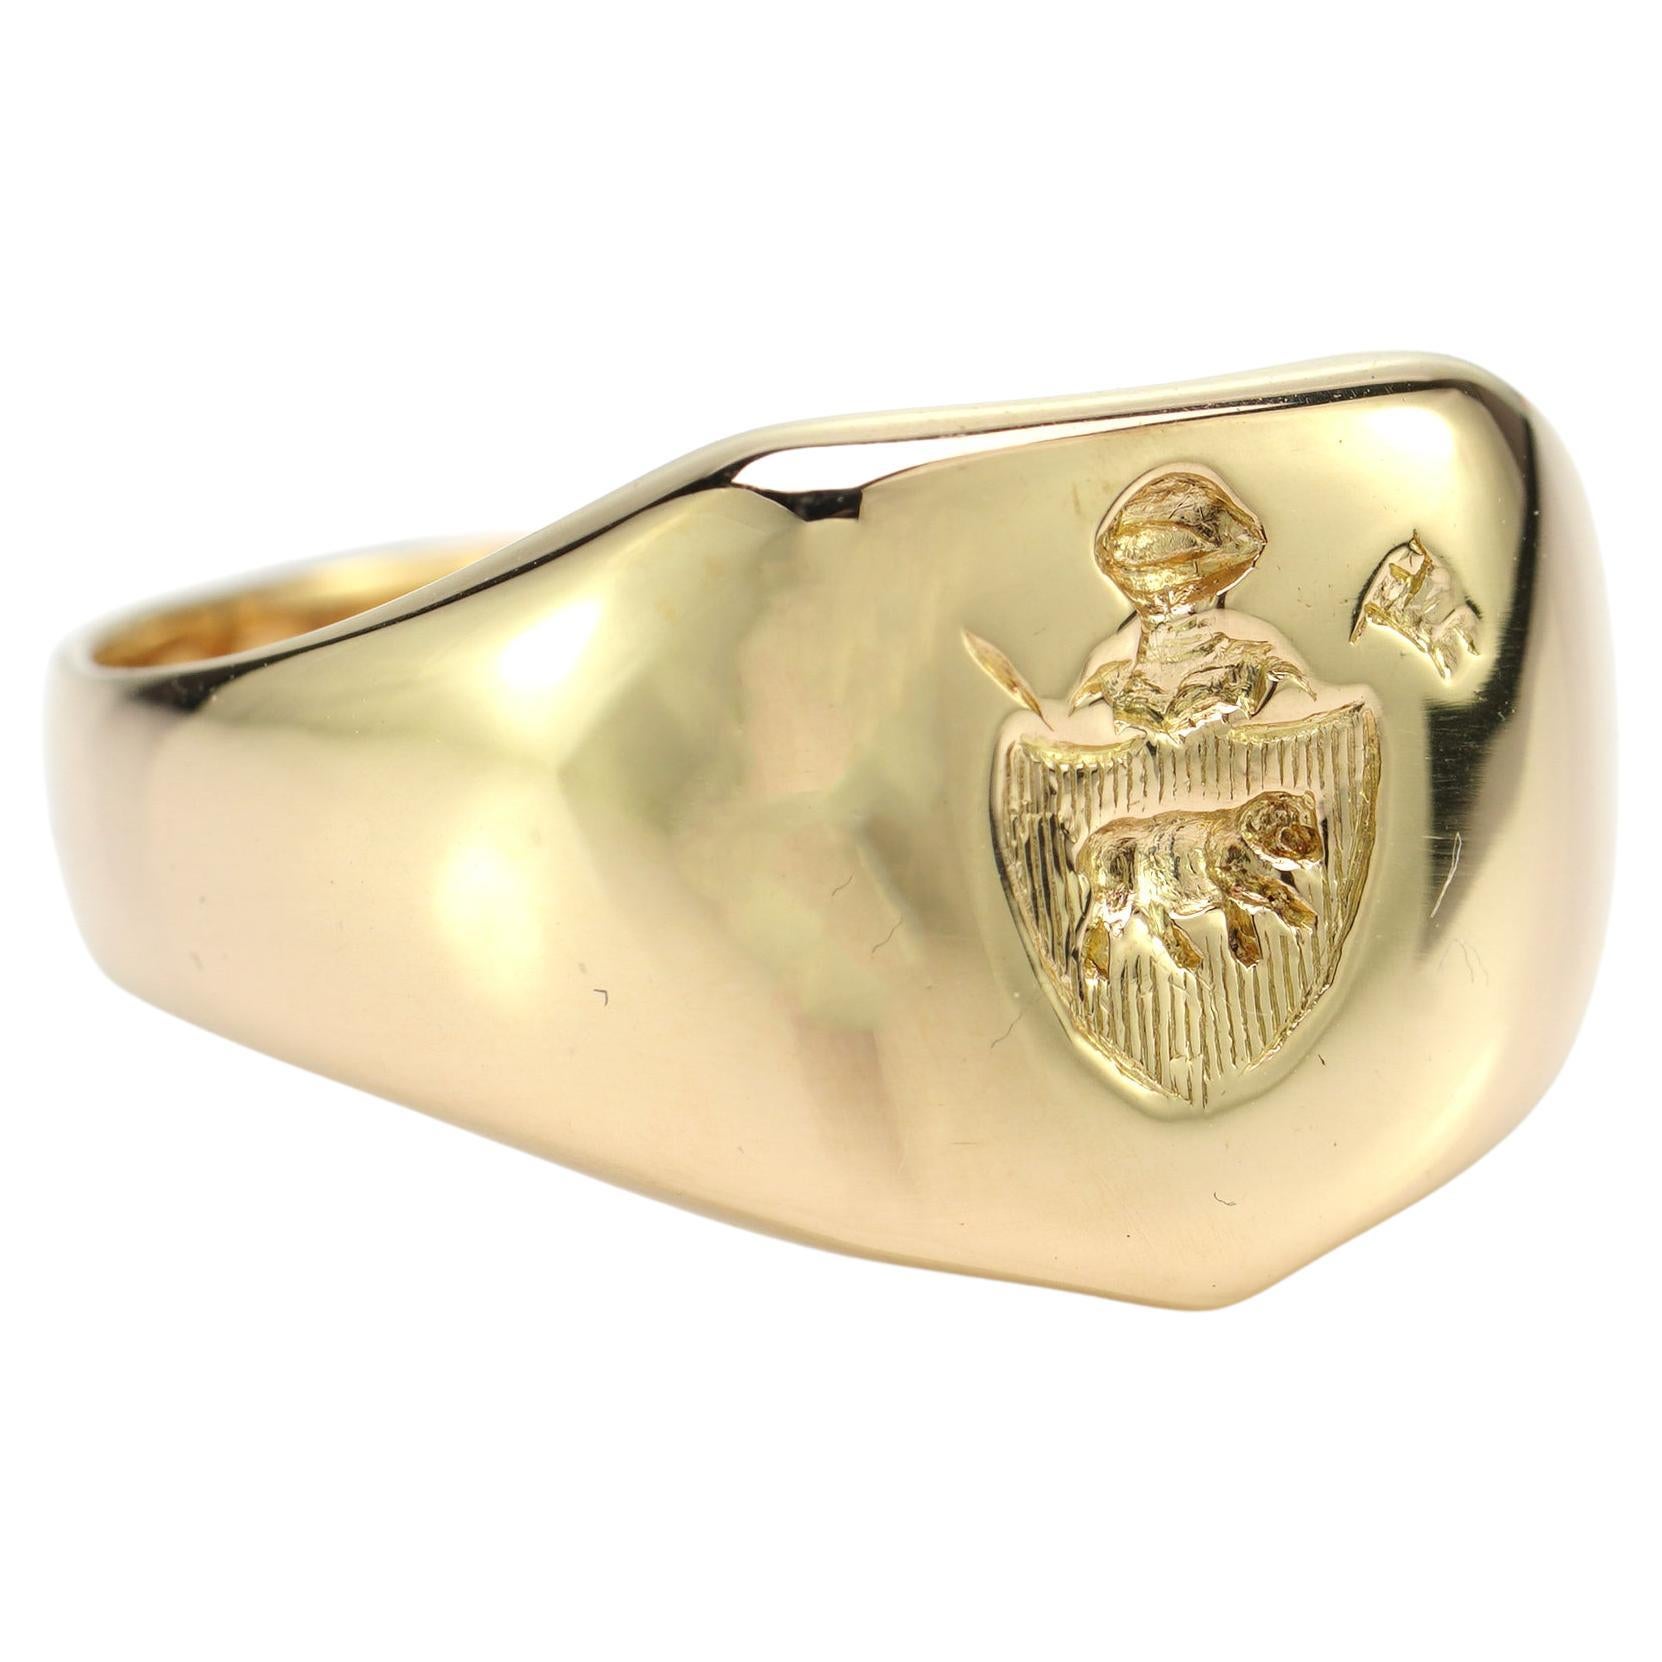 Vintage 18kt. yellow gold signet ring with coat of arms.

Made in England, Sheffield 1958
Maker: F.C
Fully hallmarked for 750/1000 gold.

Dimensions -
Ring Size: Length x Width x depth: 2.4 x 2 x 1.2 cm
Finger Size (UK) = Q (EU) = 8 1/2(US) = 57